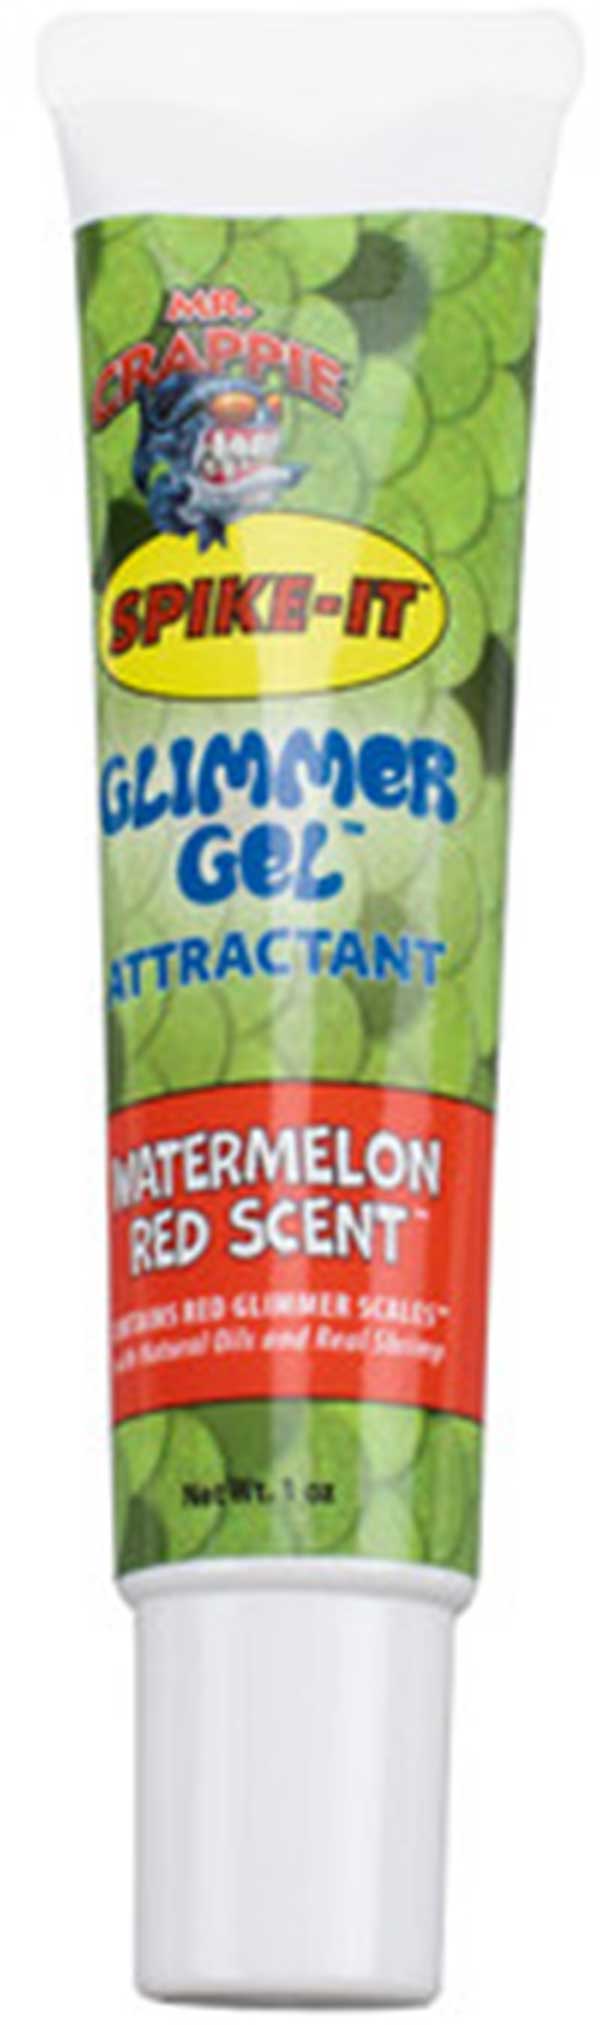 Spike It-Mr. Crappie Glimmer Gel Attractant-Now In Stock!